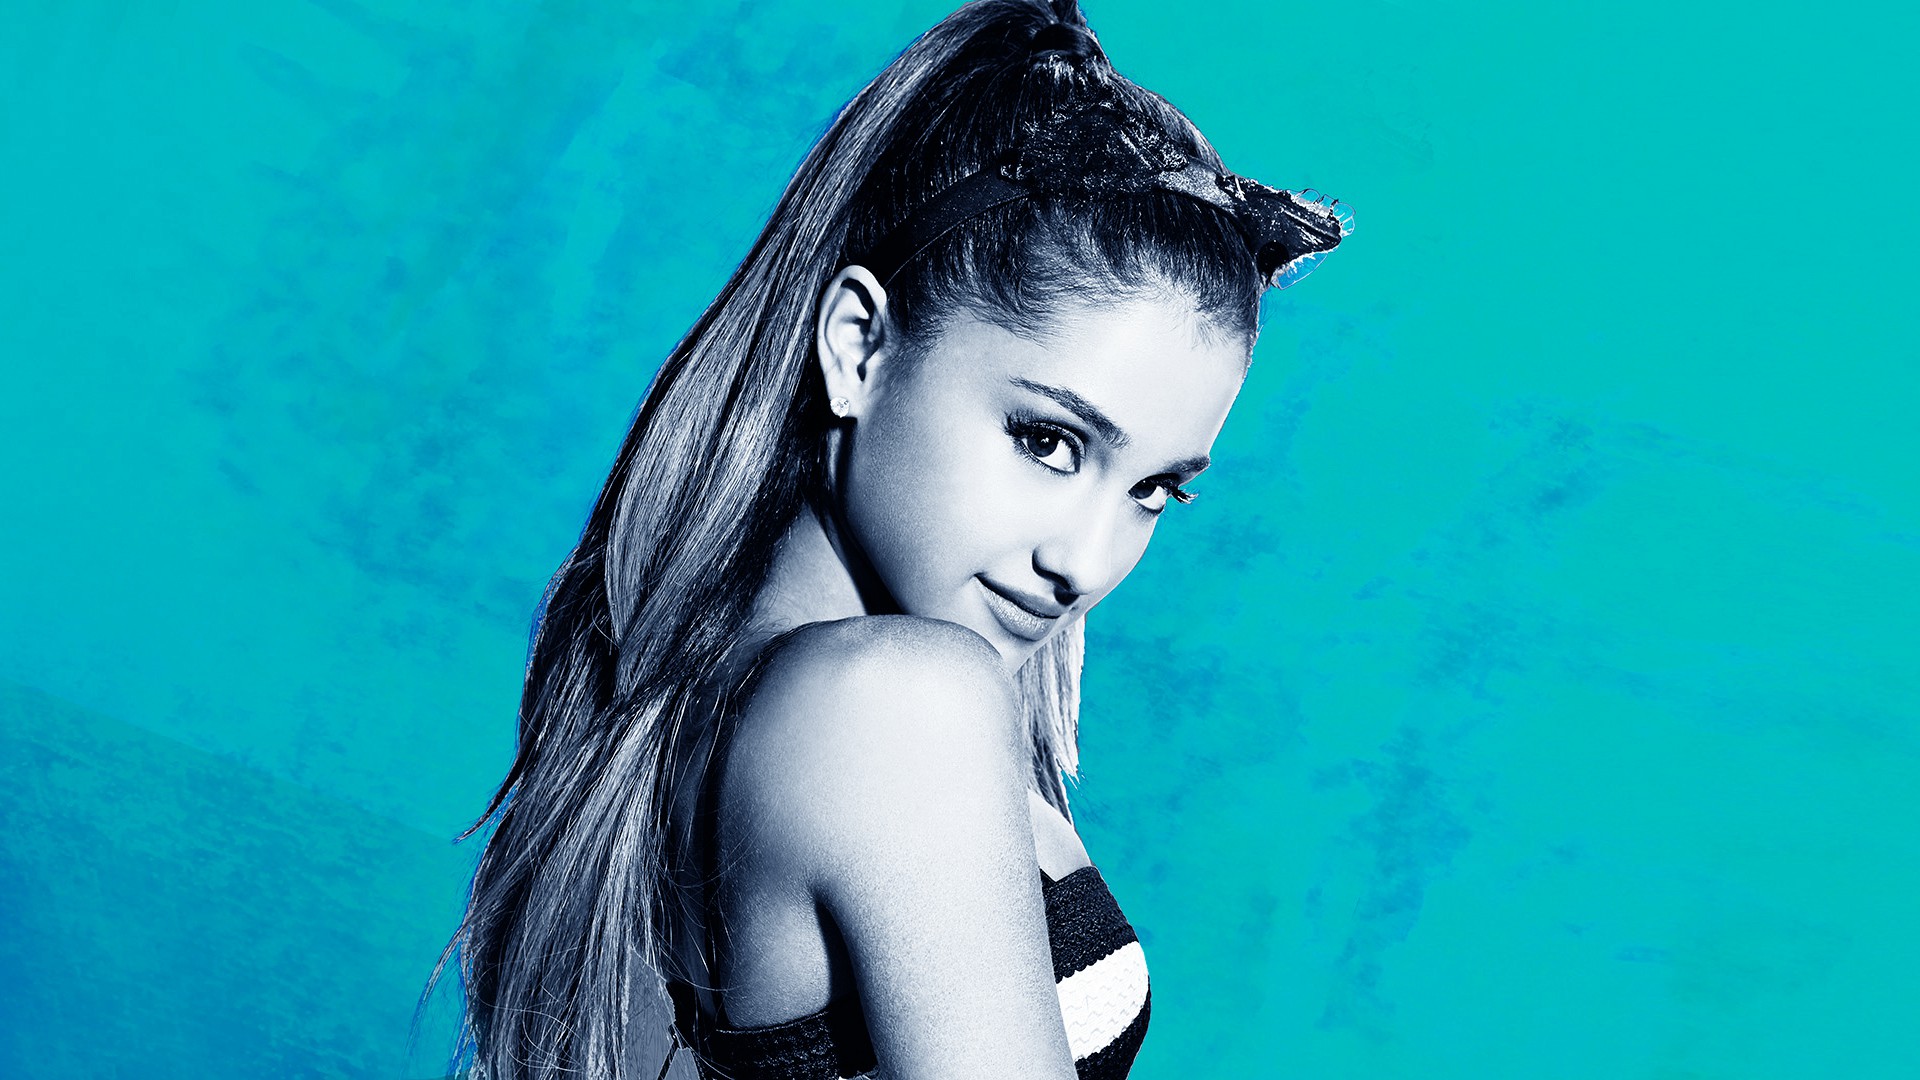 Ariana Grande 2017 Wide Wallpapers, Images - Ariana Grande Pics Download , HD Wallpaper & Backgrounds